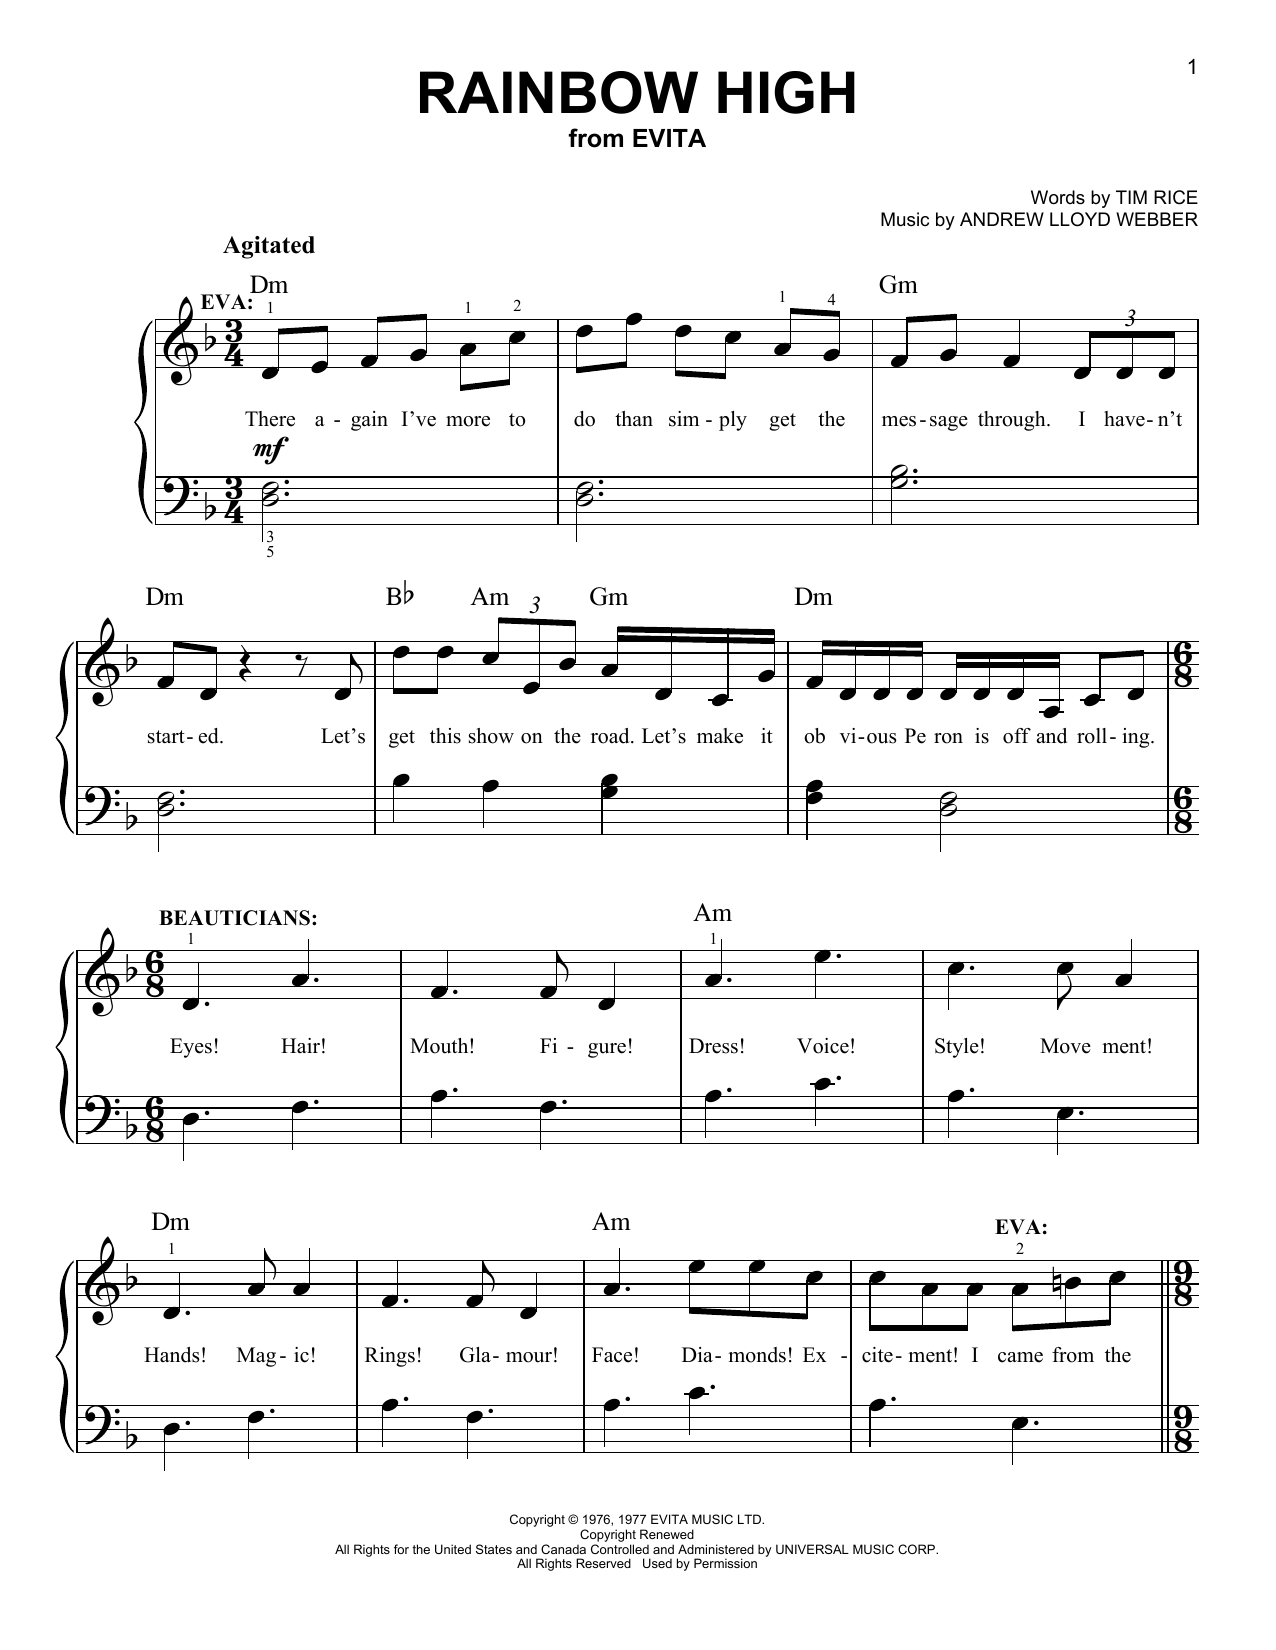 Andrew Lloyd Webber Rainbow High (from Evita) sheet music notes and chords. Download Printable PDF.